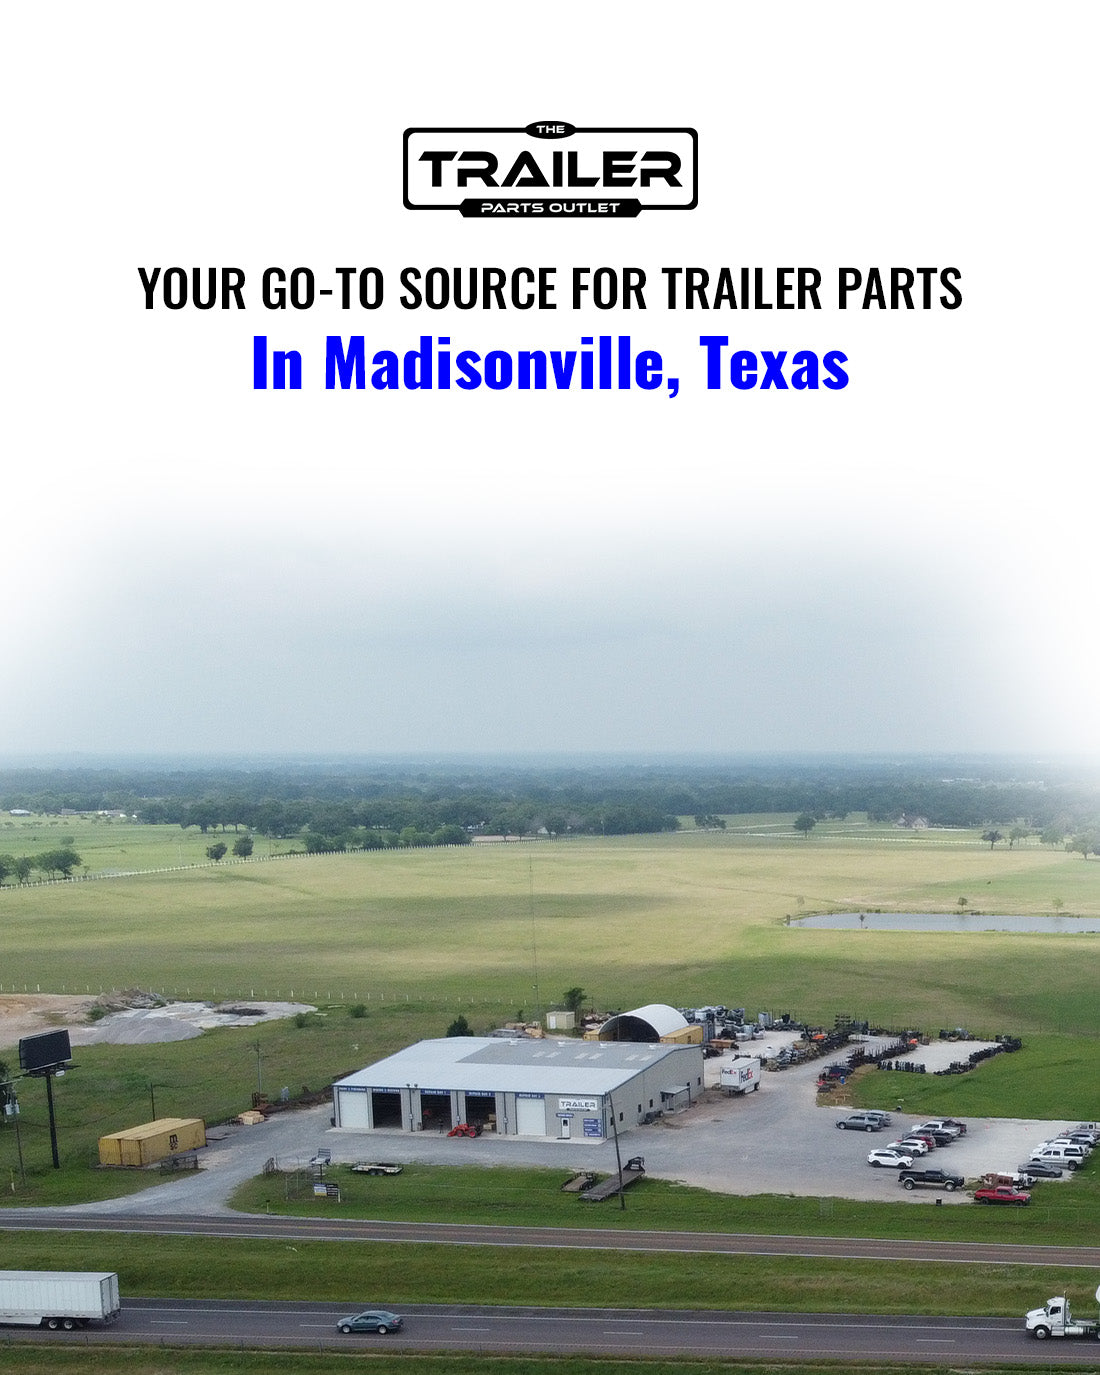 Your Go-To Source for Trailer Parts in Madisonville, Texas